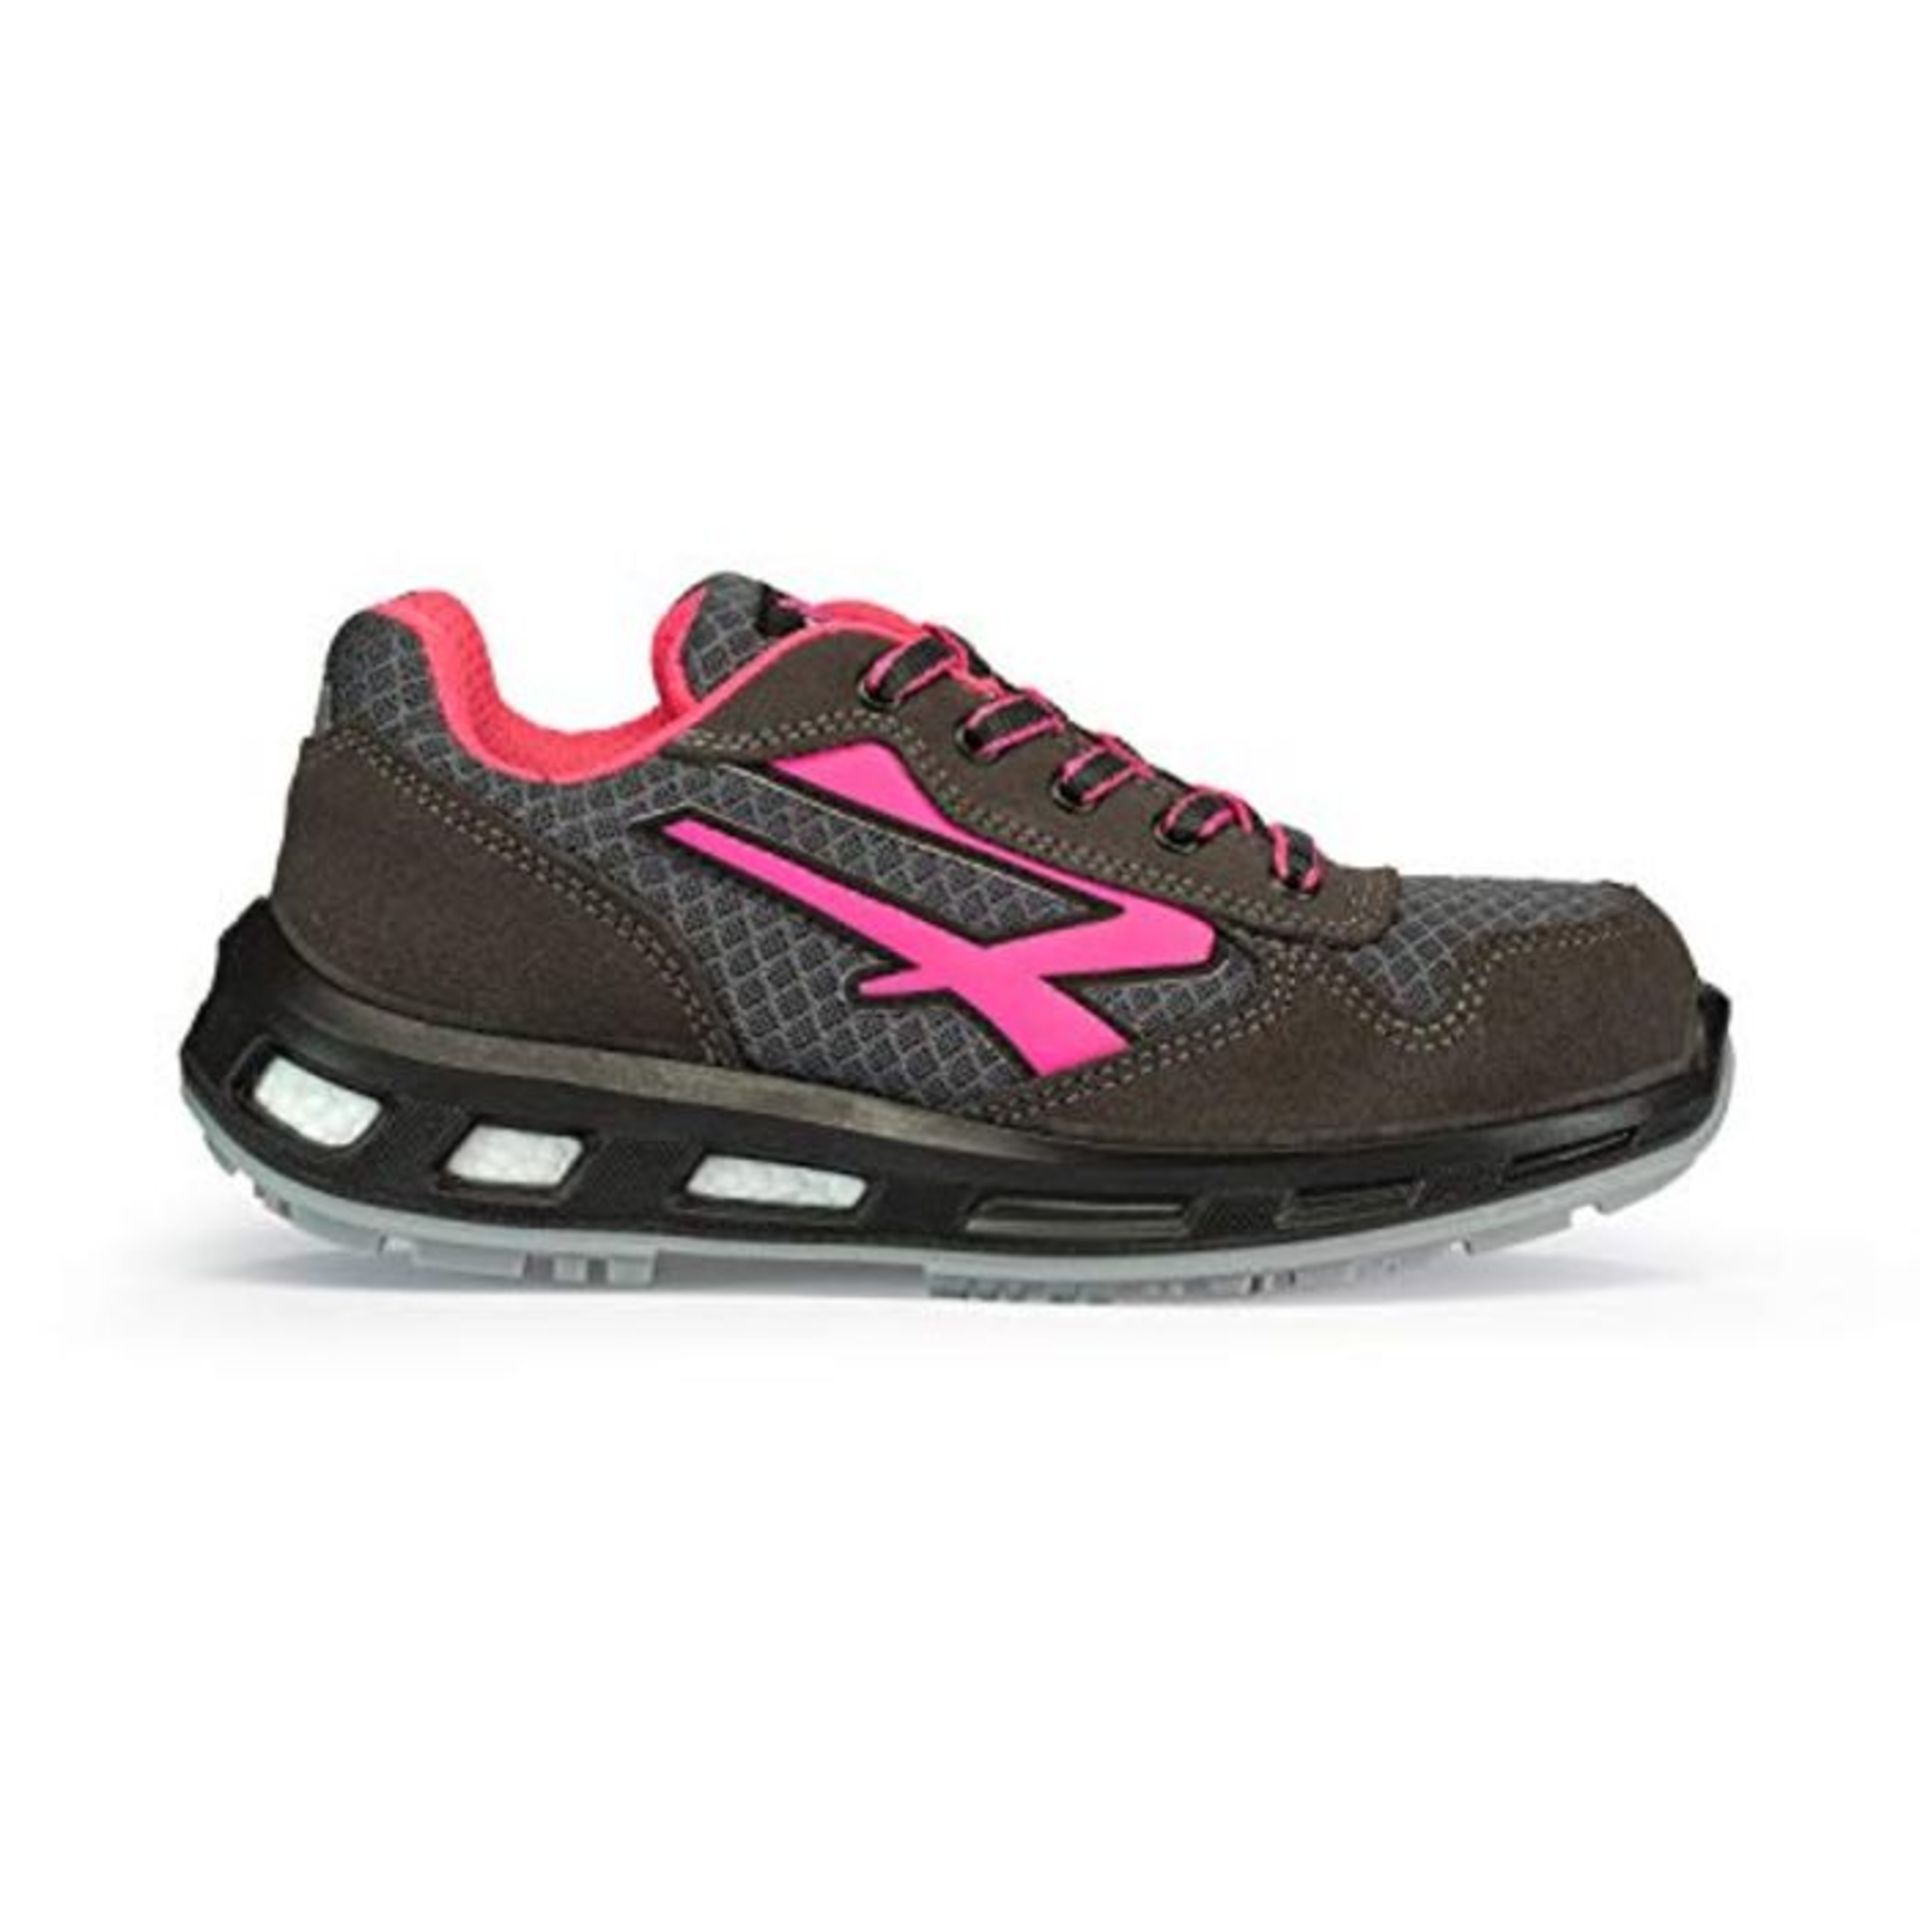 RRP £77.00 U-POWER Unisex Adults Verok S1p SRC Safety Shoes, Pink (Rose 000), 6 UK